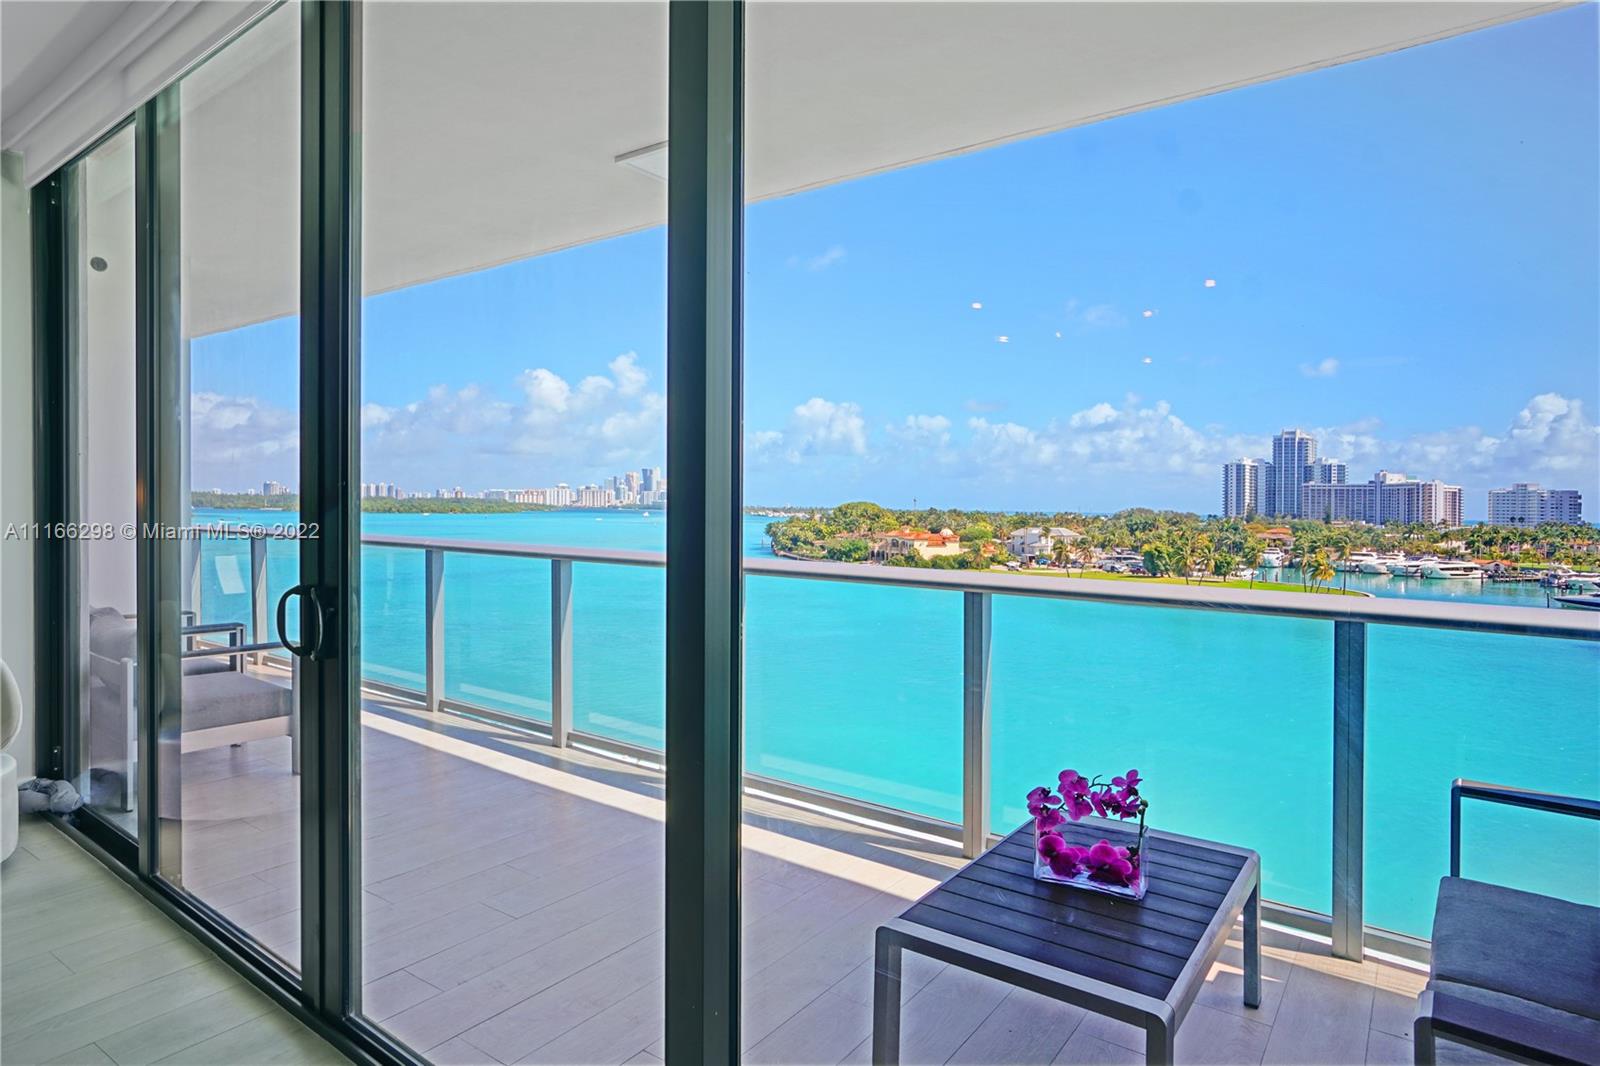 RARE TO FIND – Live in the spectacular boutique building SERENO RESIDENCES, north corner unit and waterfront views | ** Click on Virtual Tour Link **| 4 BDR | DEN | 3 FULL Bath + ½ Bath | 1 Boat Slip Max 45” | 2 Assigned Covered Parking | 1 Extra Storage | Elevator | exclusive BBQ Area| Pool |Kayaks | GYM | Bay Harbour Islands is a BEAUTIFUL hidden gem tucked behind Surfside and Bal Harbor Village, that is undergoing a major redevelopment | Known worldwide for family atmosphere | Steps away (around 0.6 mile) to sandy beaches, famous Bal Harbor Shops, Restaurants, House of Worship, supermarket, Excellent “A+” public school & + | Yearly rentals allowed immediately | NO SHORT TERMS RENTALS.